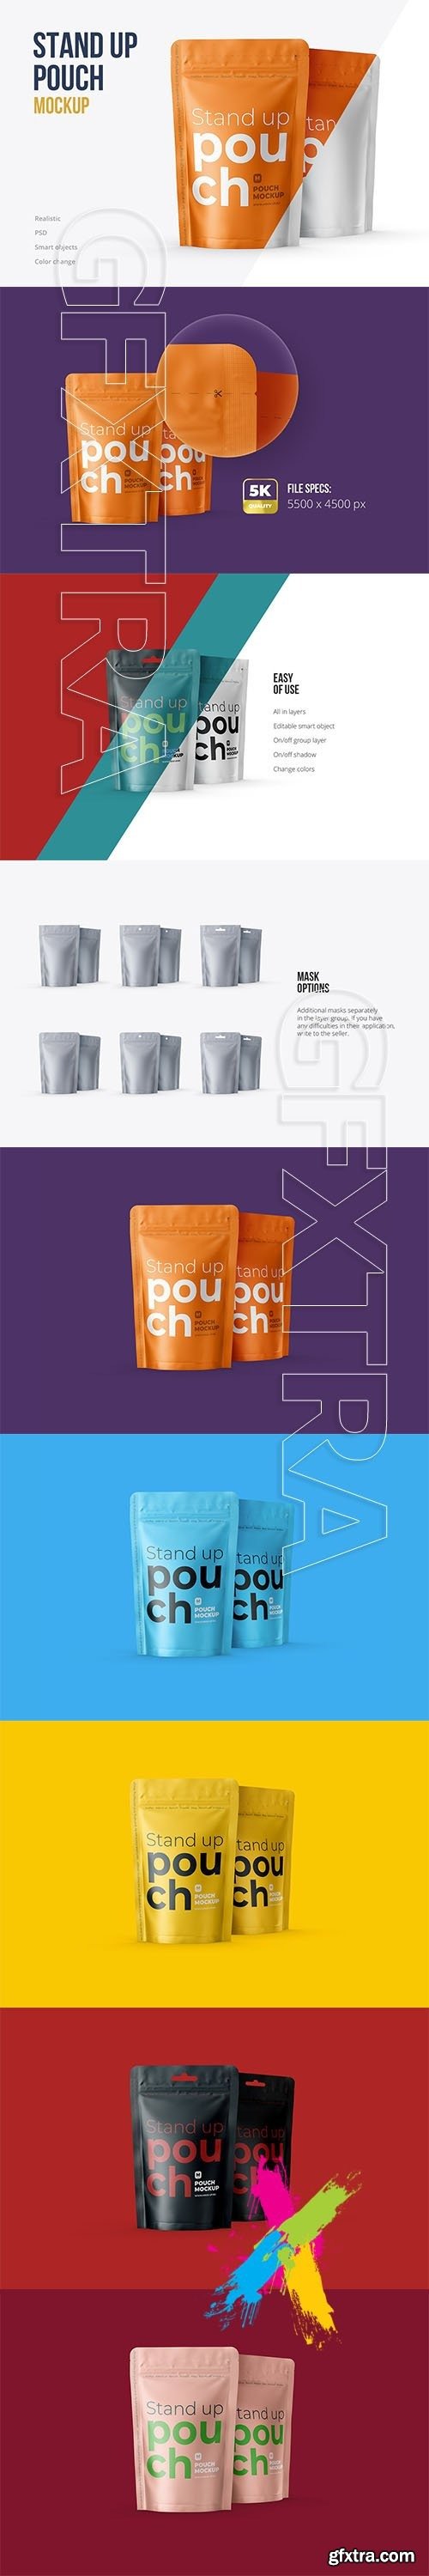 CreativeMarket - Stand Up Pouch Front and Half Side 5161150